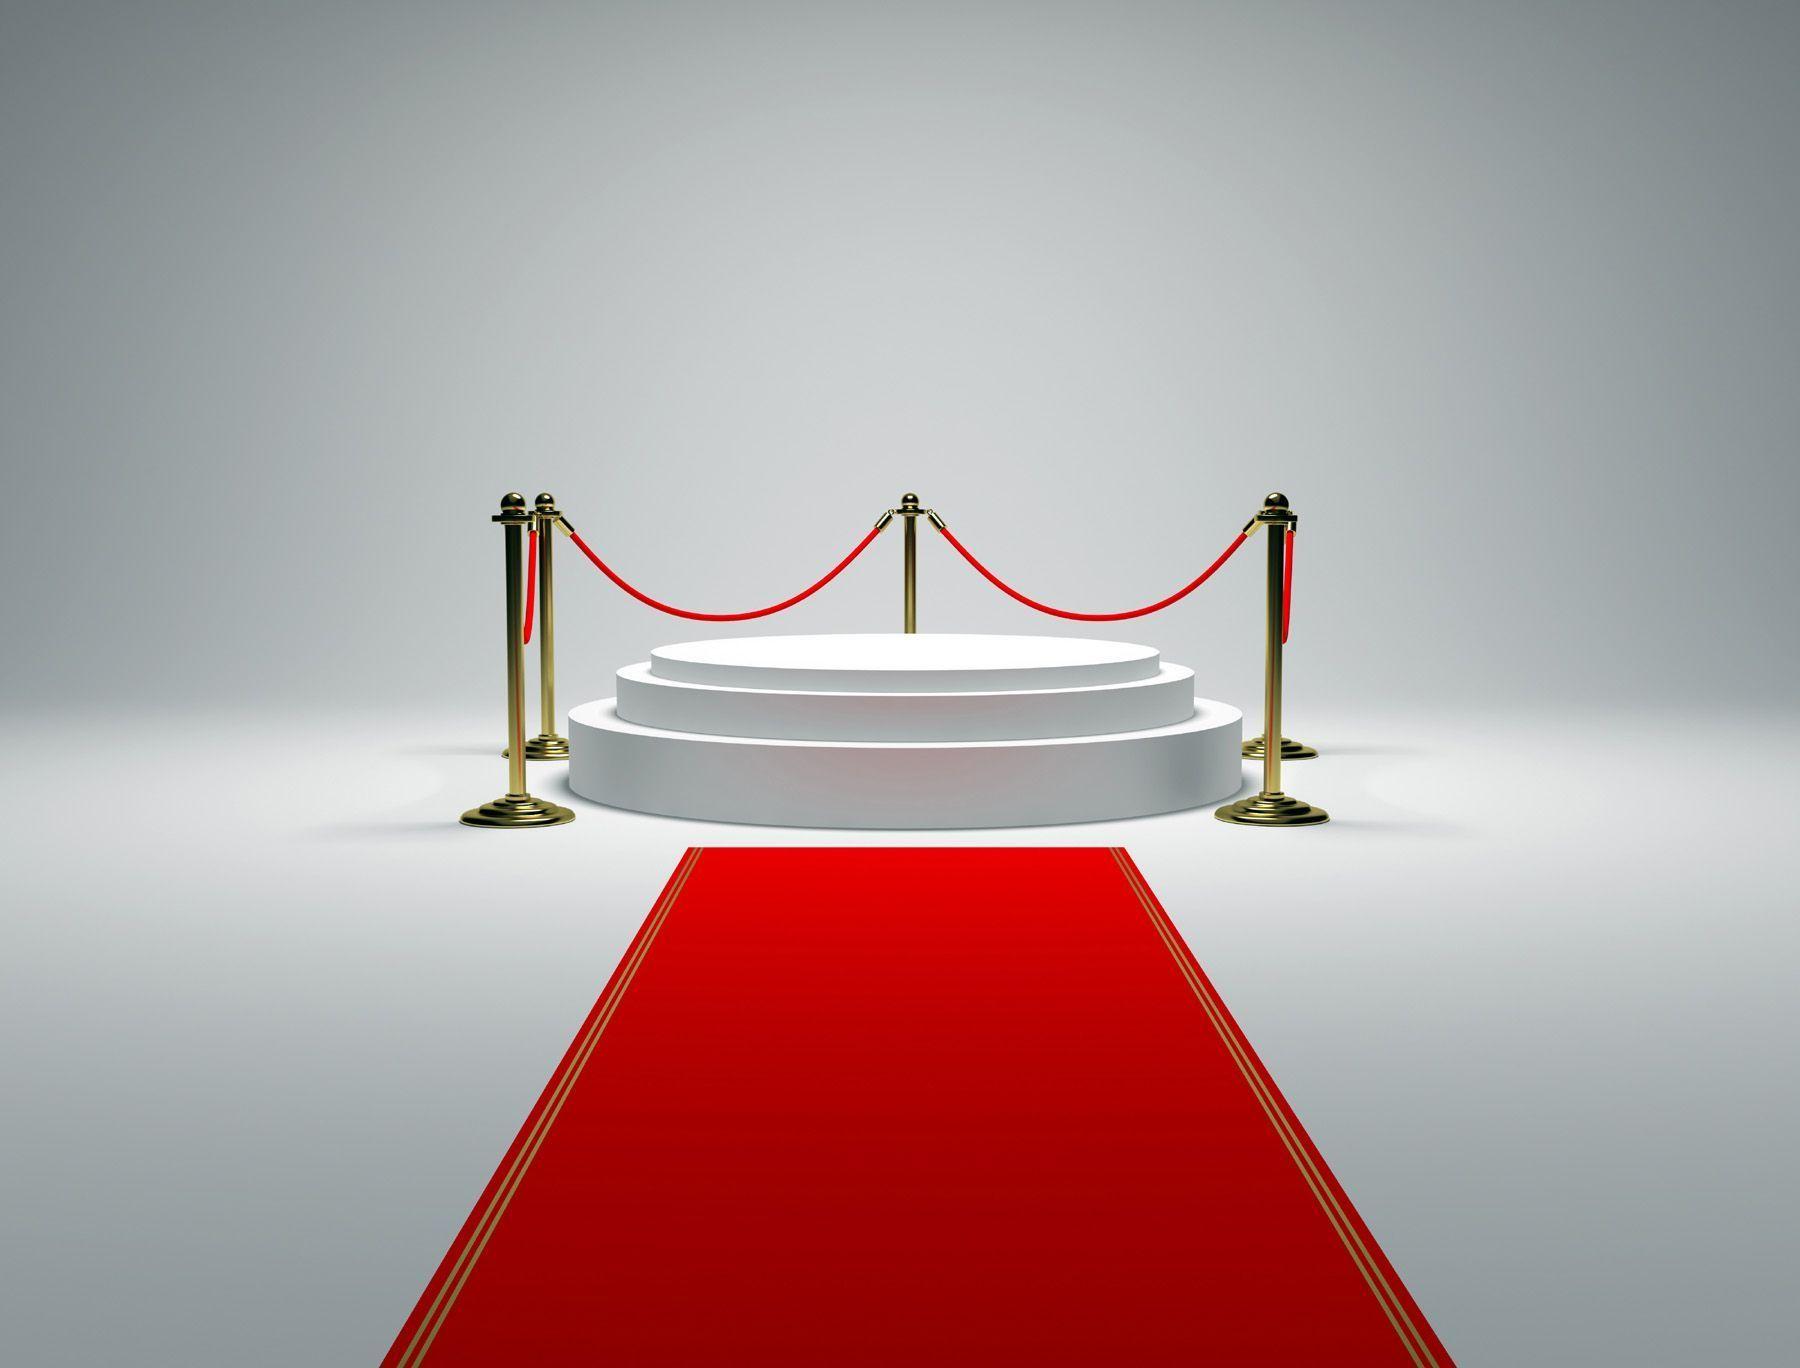 Circular booth with guardrails on the red carpet 49947